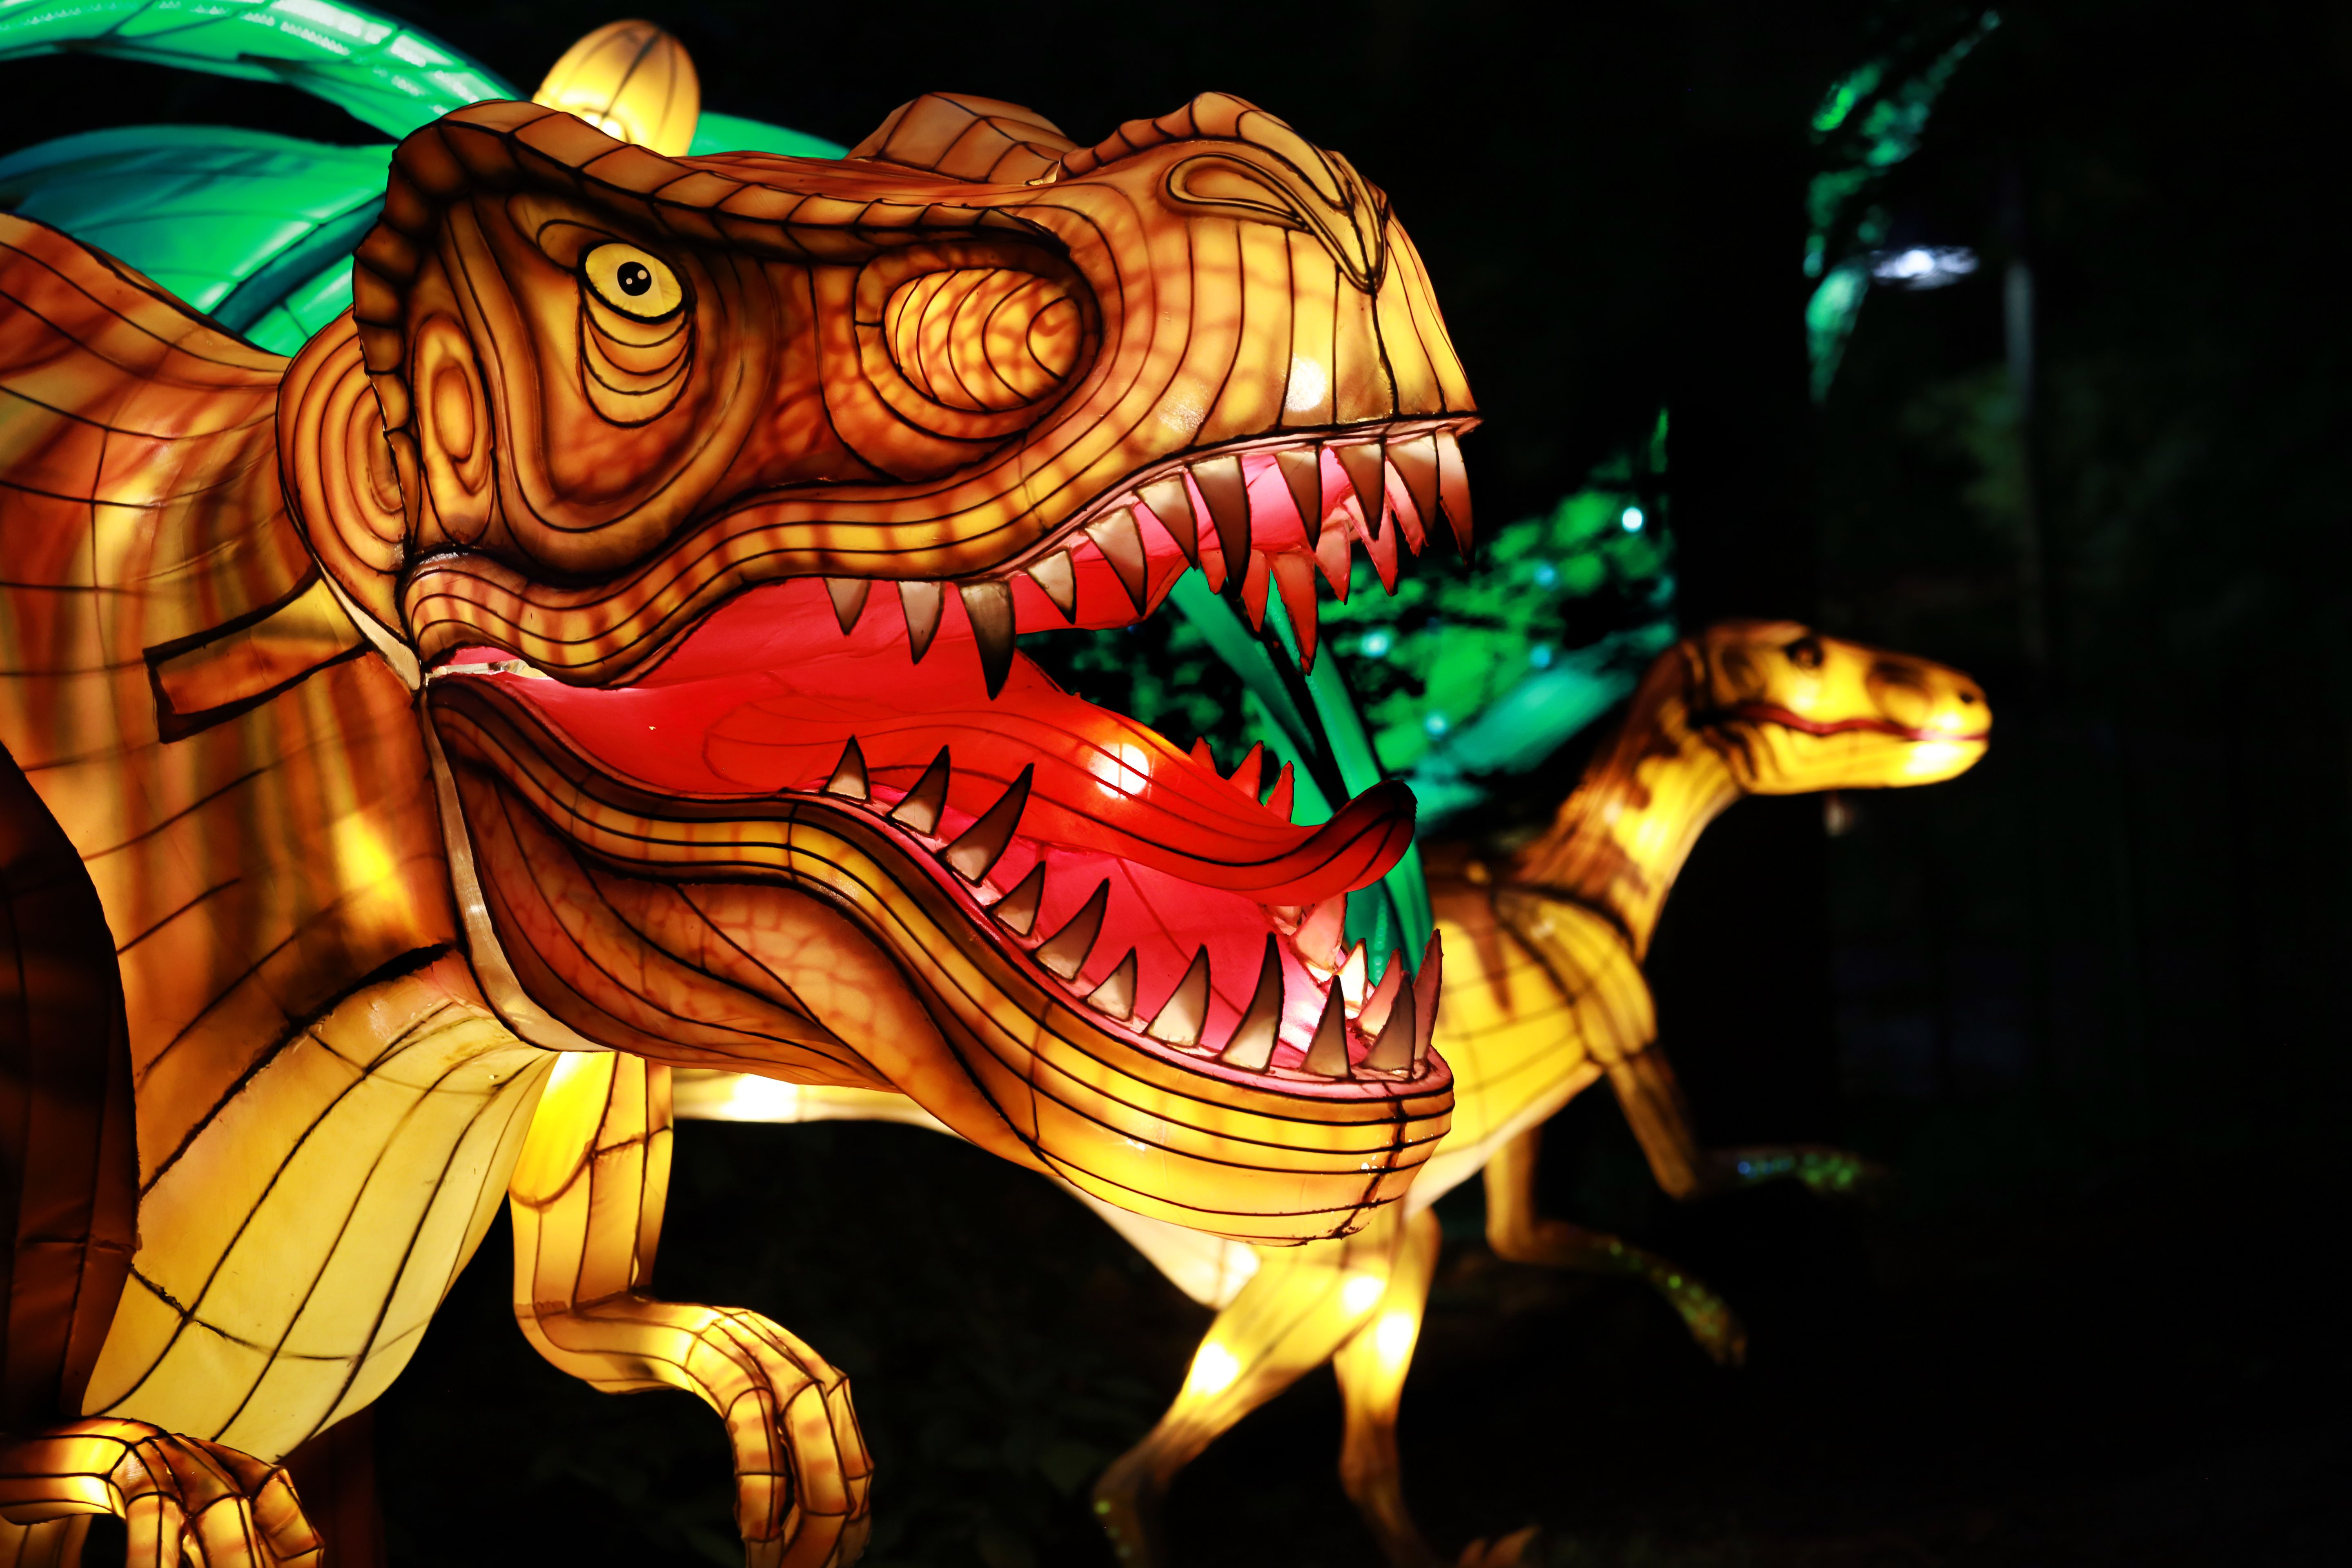 Asian Lantern Festival | Live Stream, Lineup, and Tickets Info